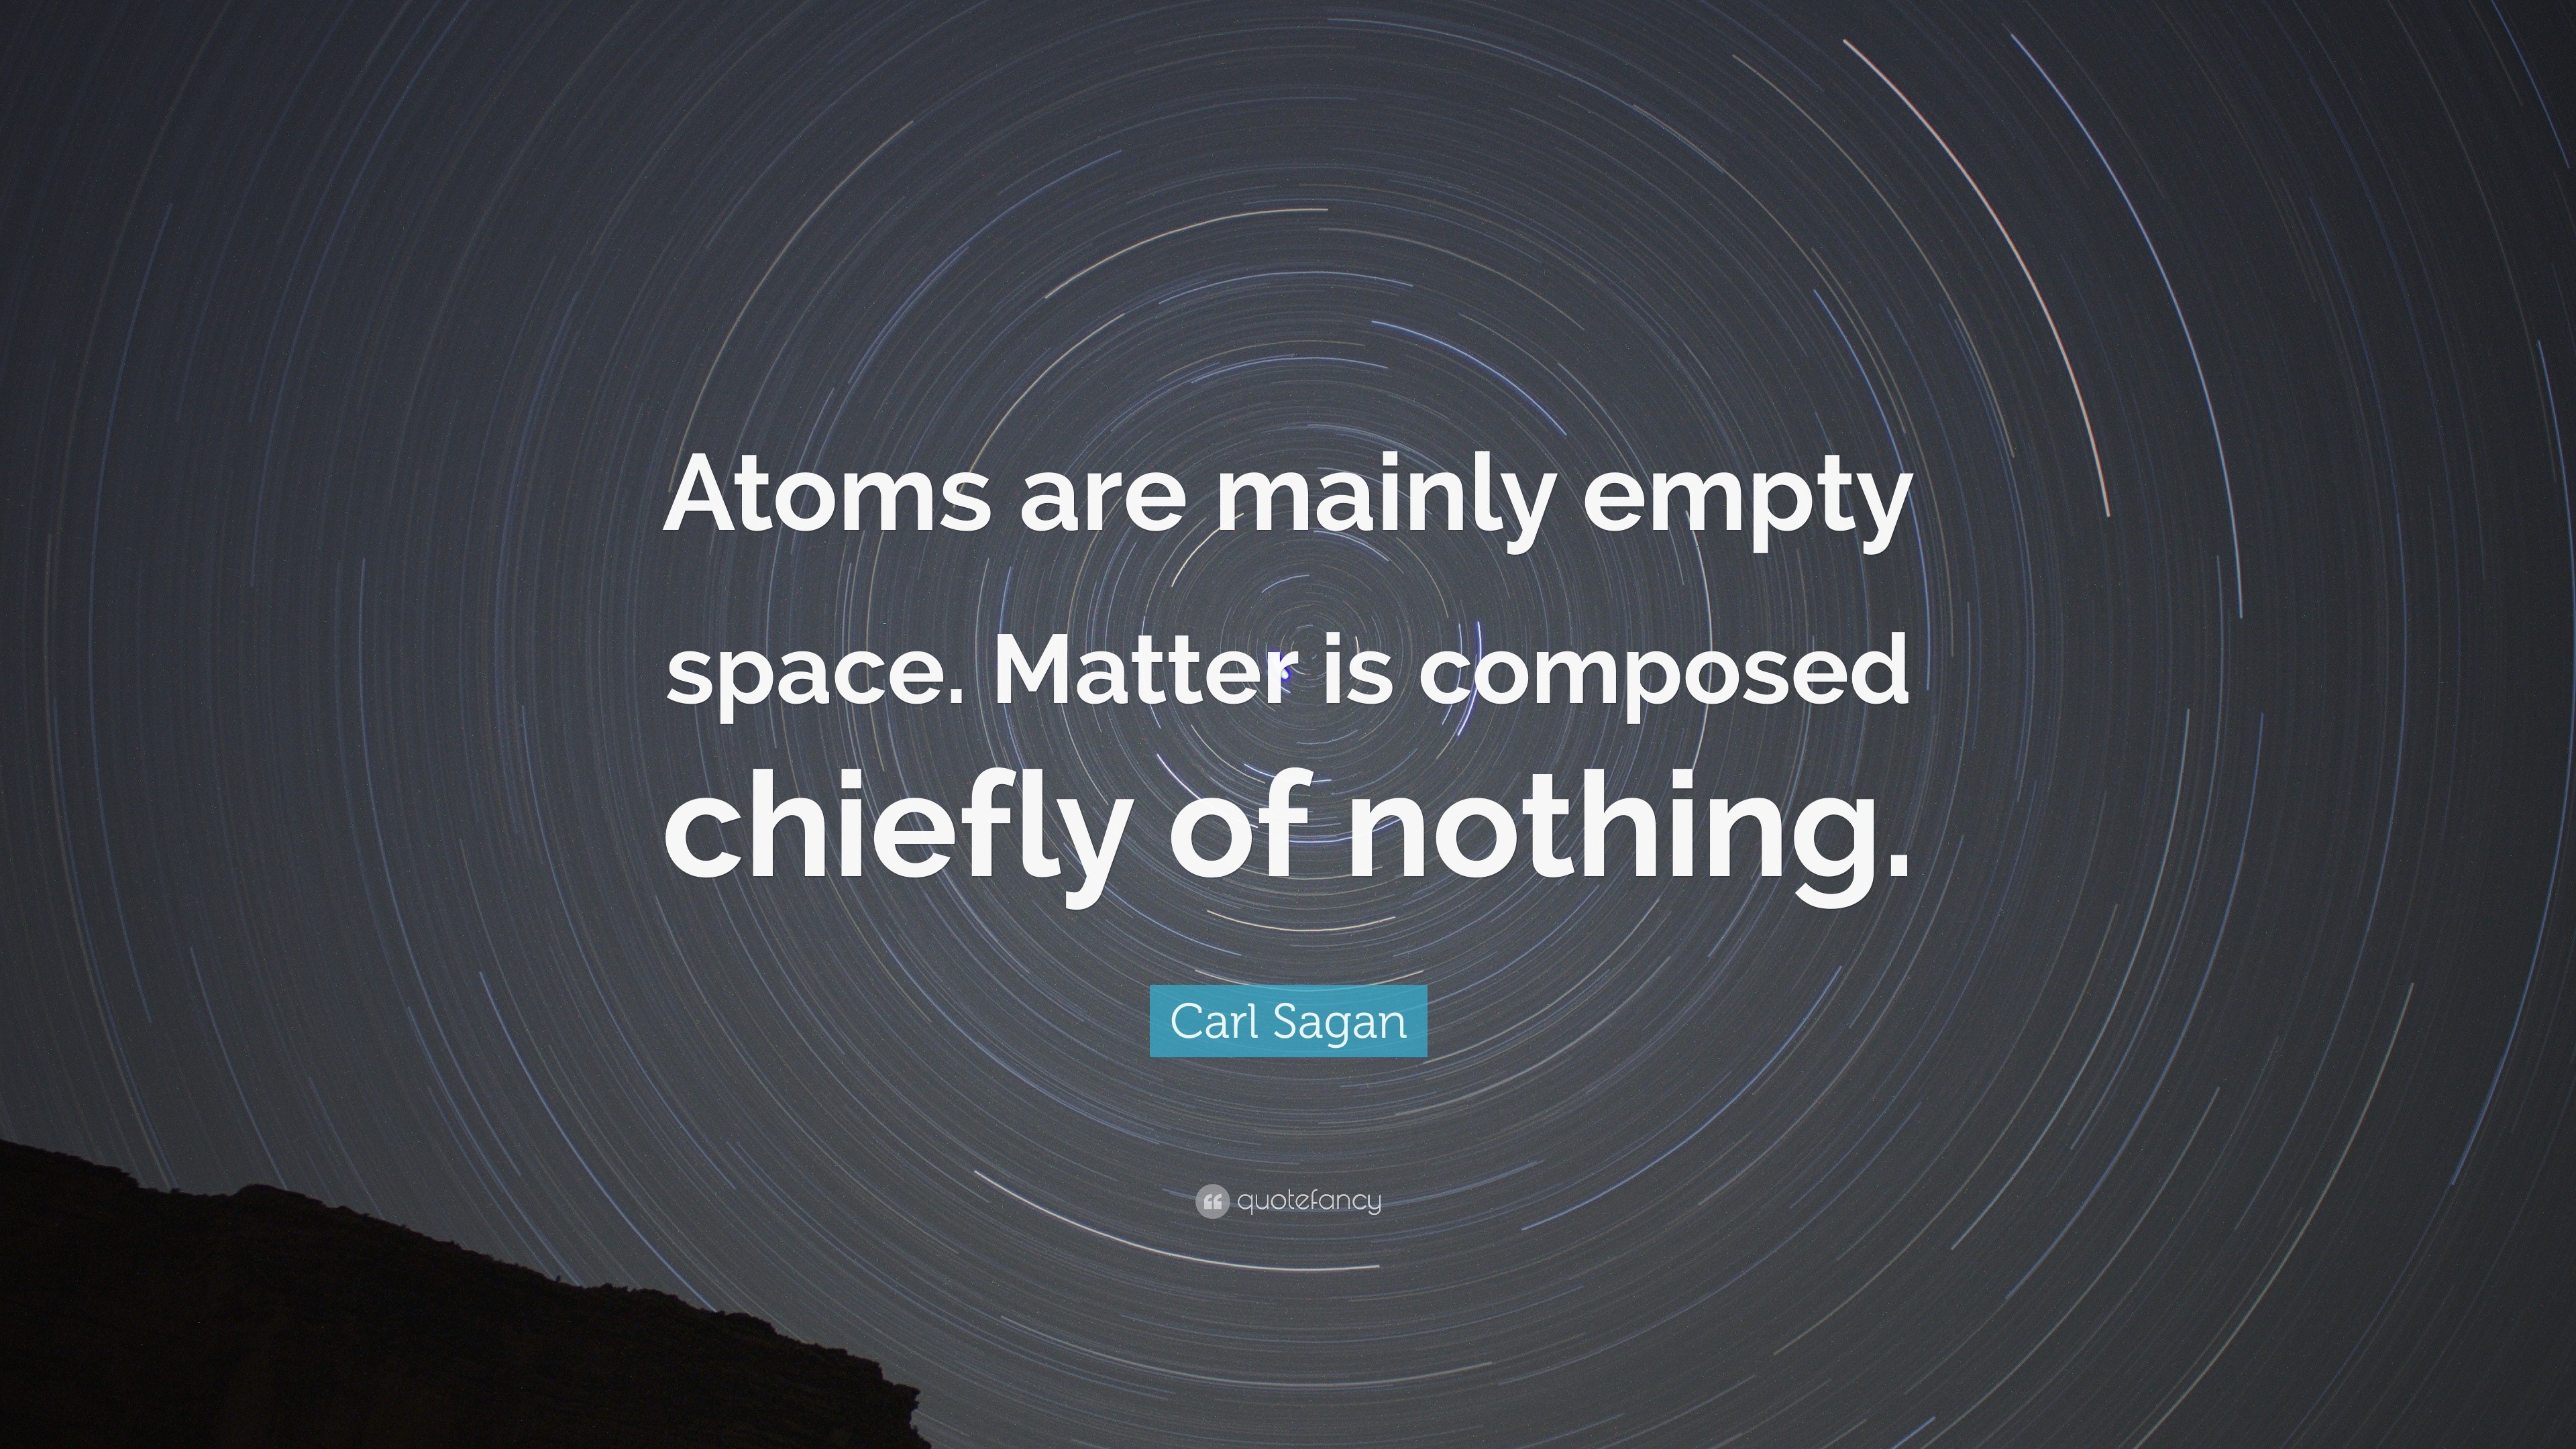 87269-Carl-Sagan-Quote-Atoms-are-mainly-empty-space-Matter-is-composed.jpg